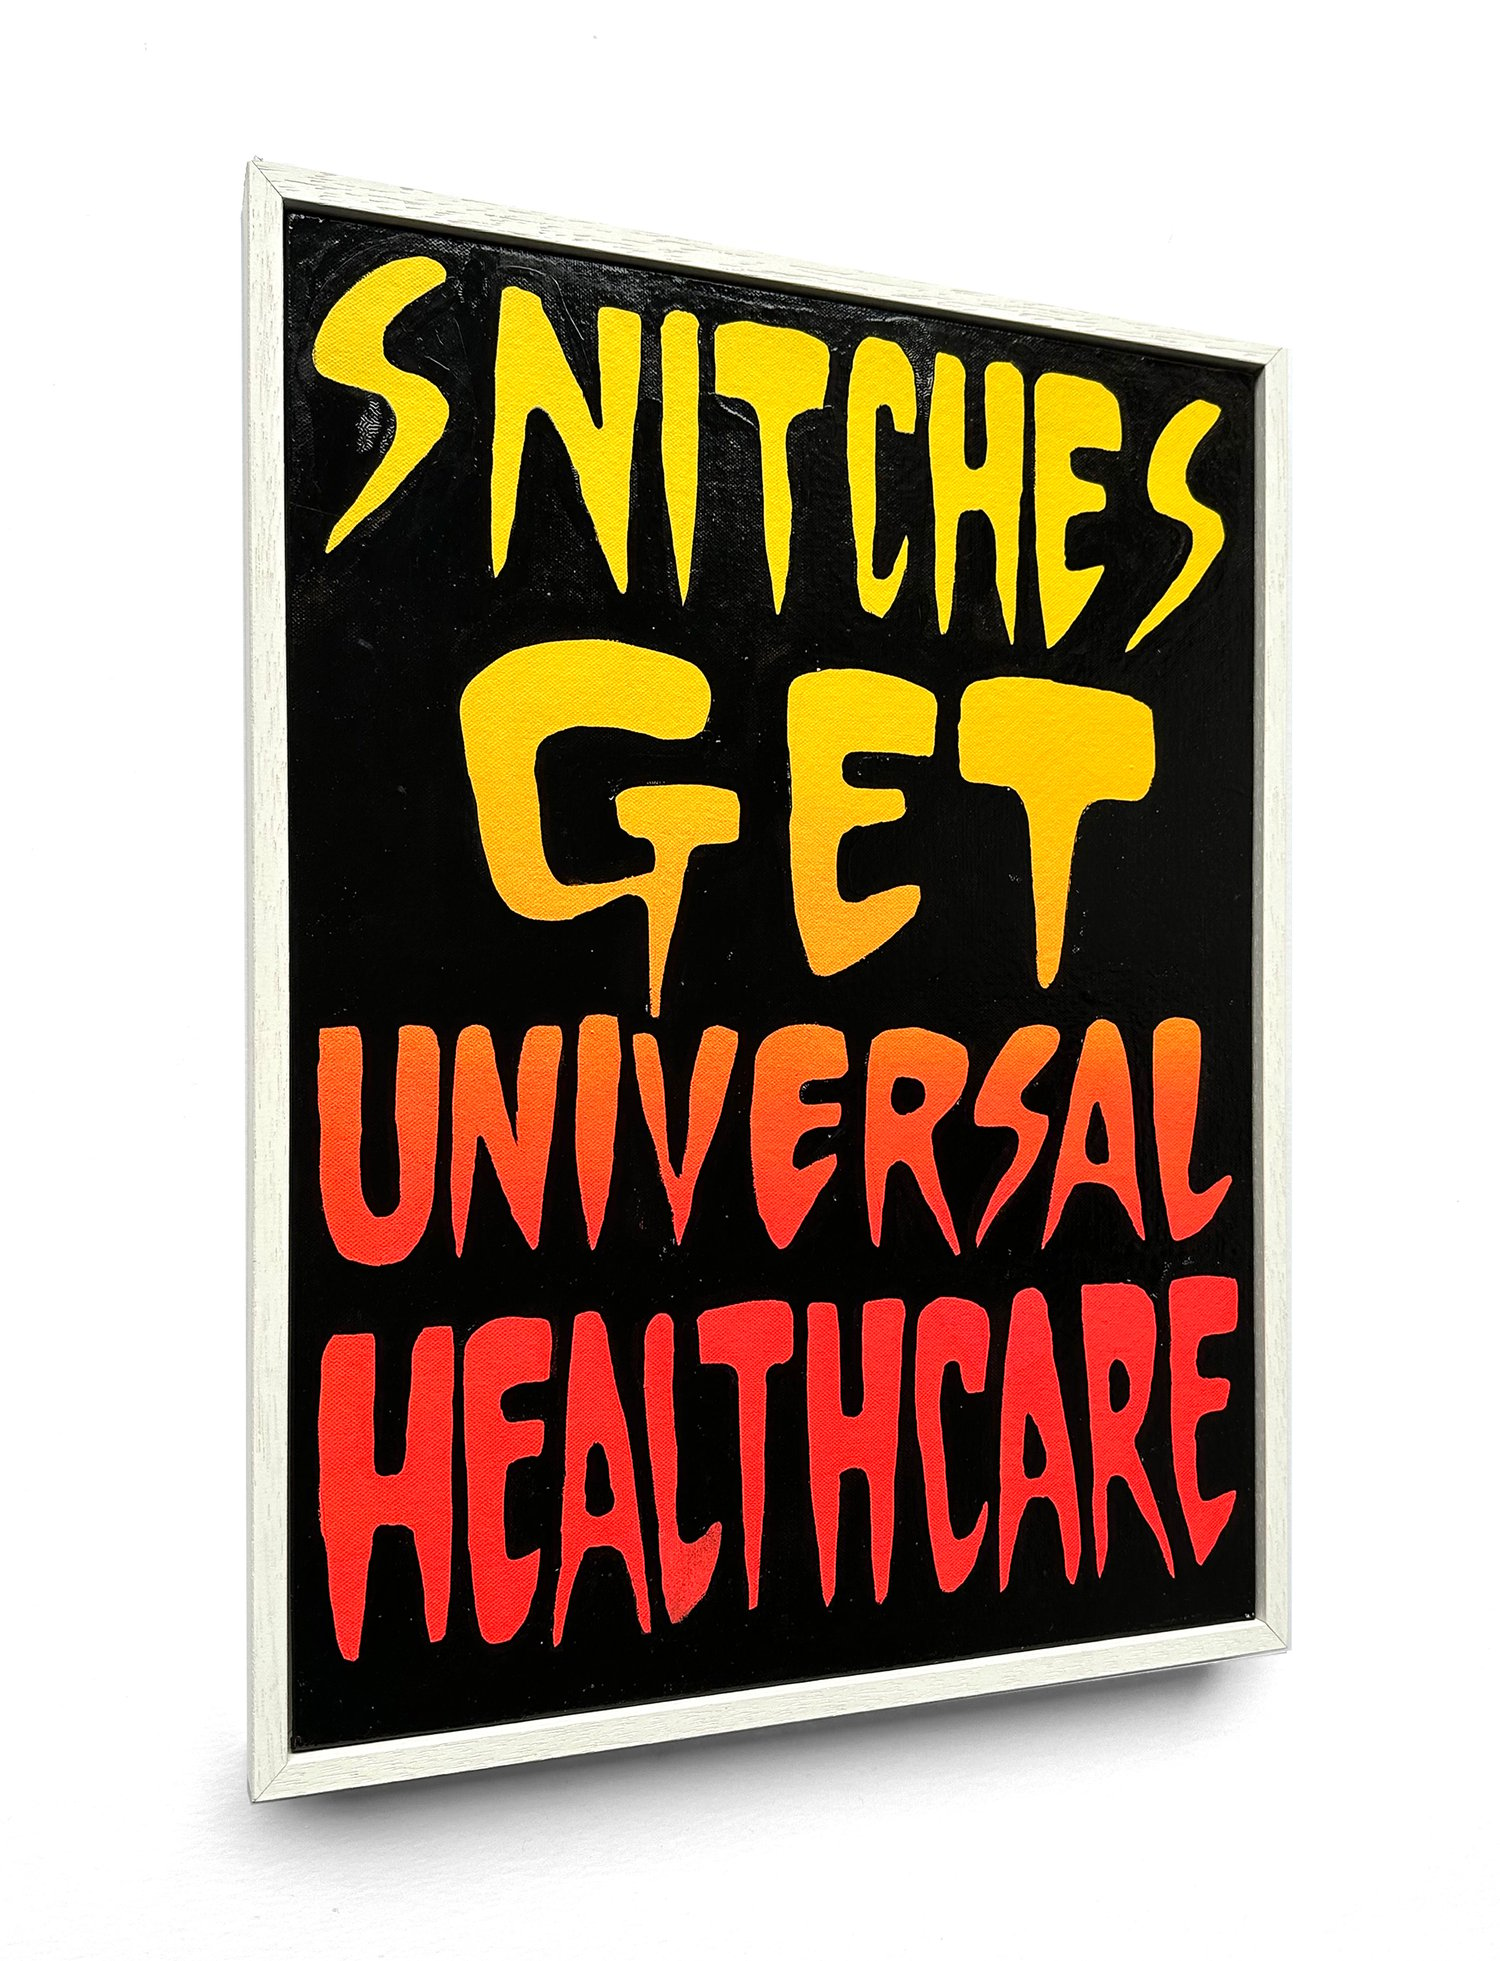 Image of ‘Universal Healthcare’ by EDWIN